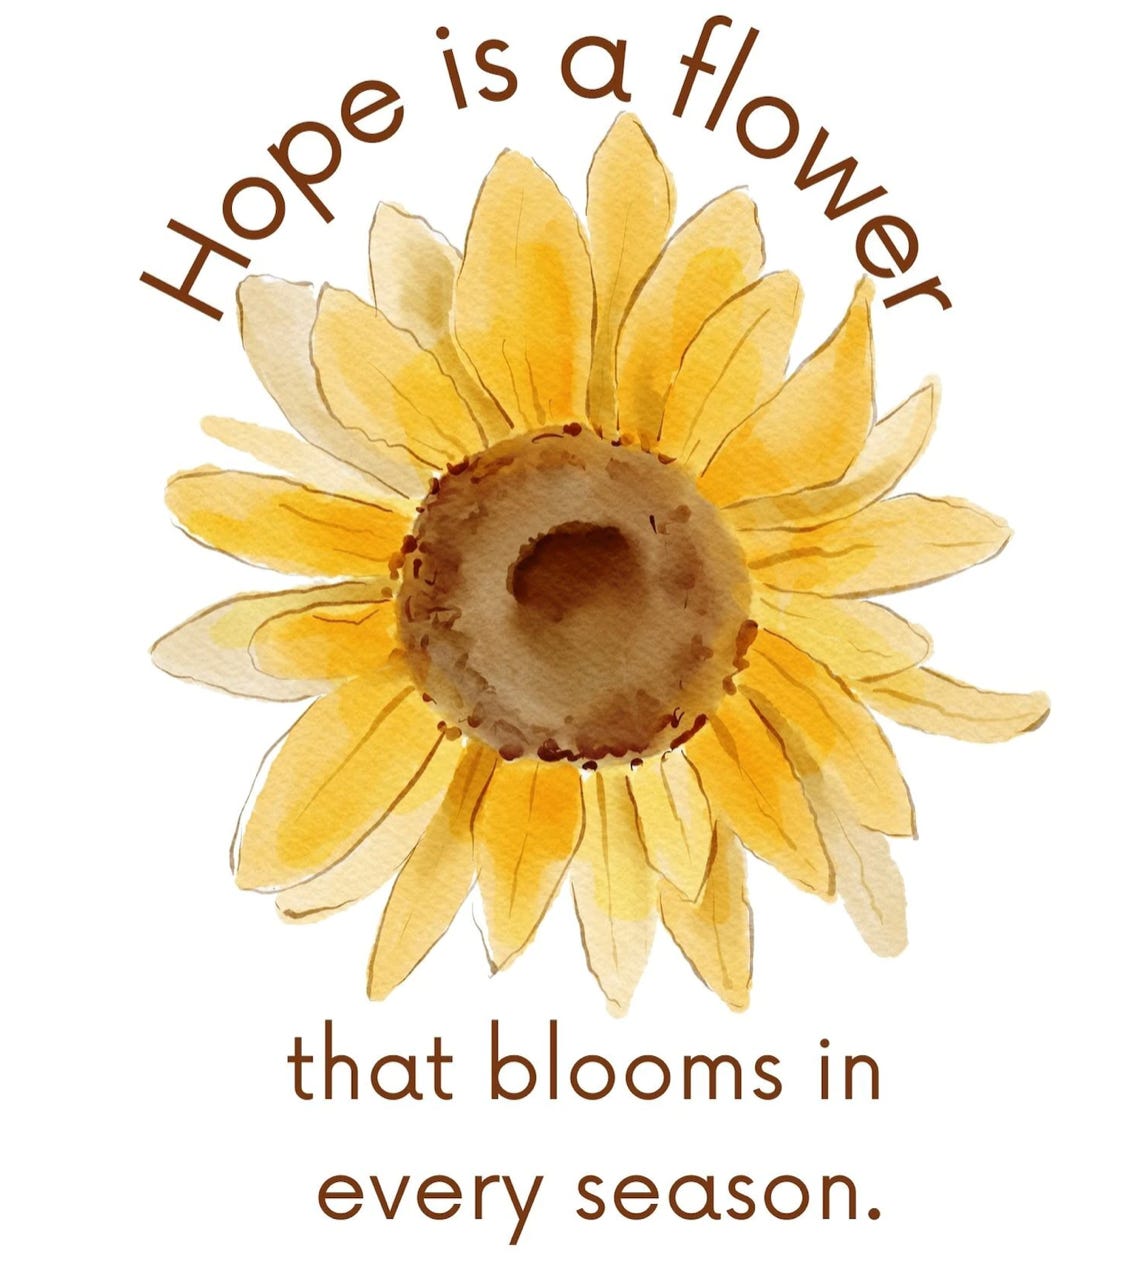 Hope is a flower that blooms in every season.